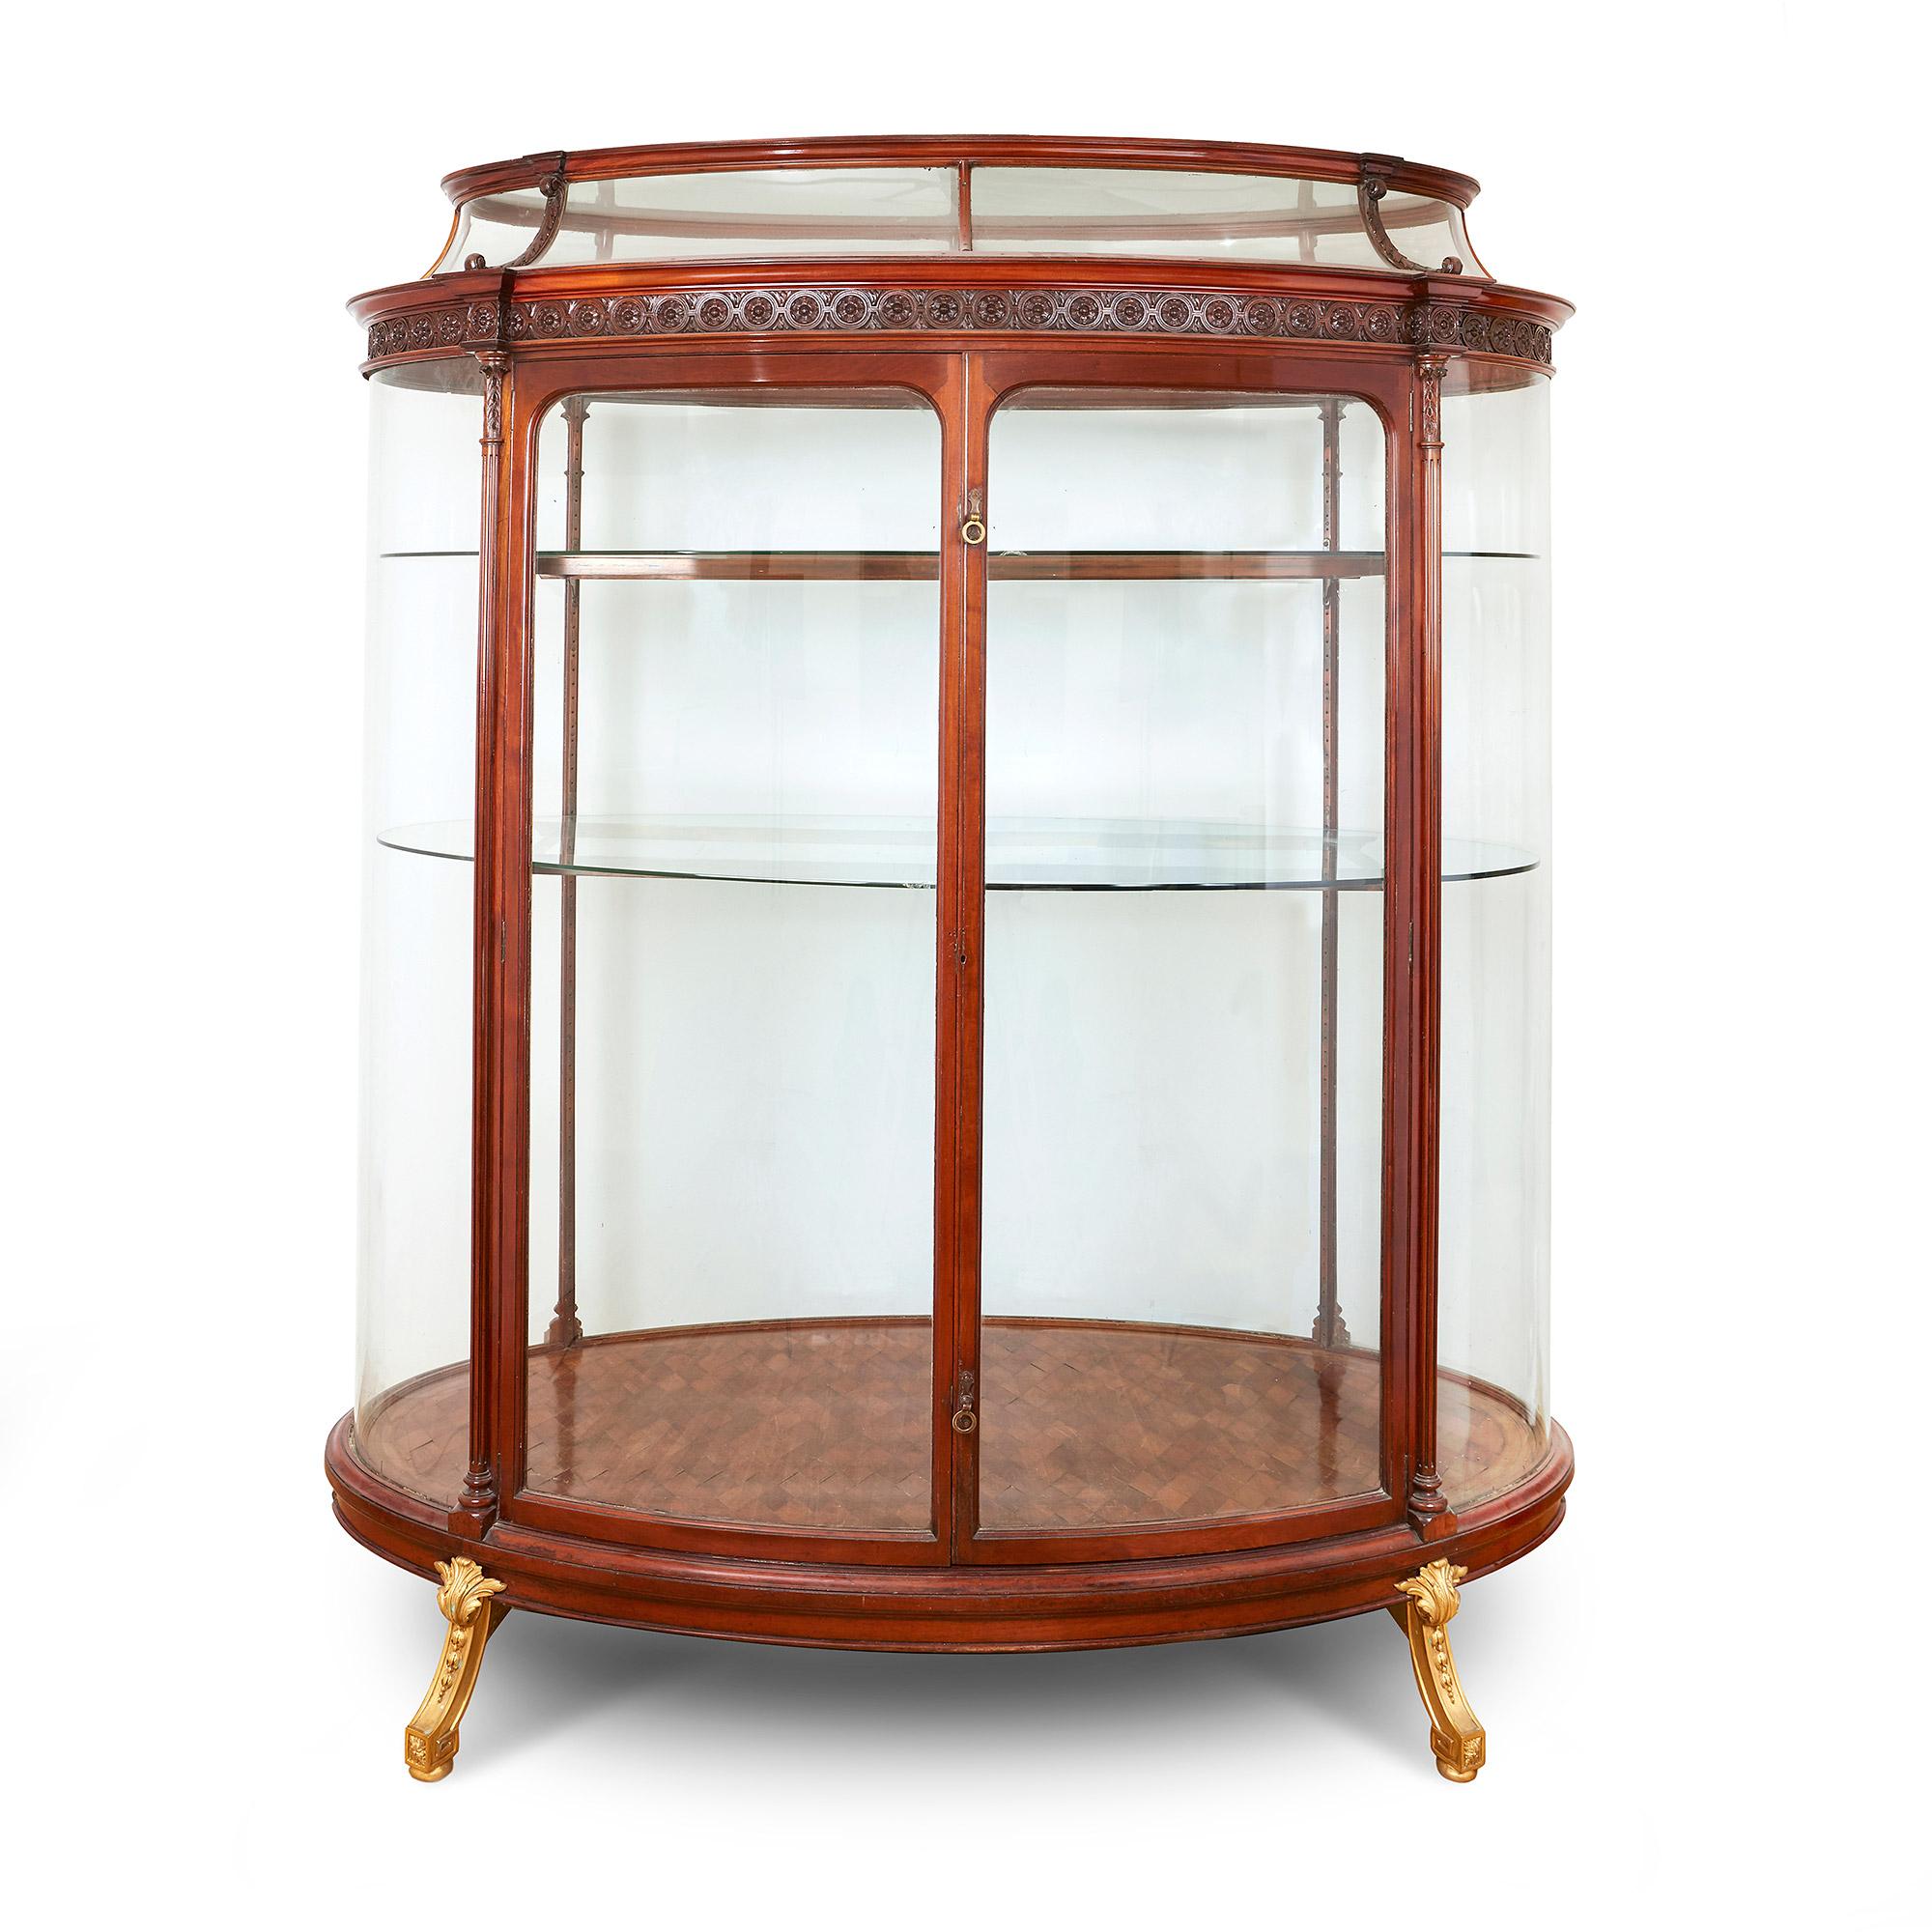 The vitrine oval shaped, with central hinged tall doors to the front and glazed display all around, mounted with ormolu handles and short legs.